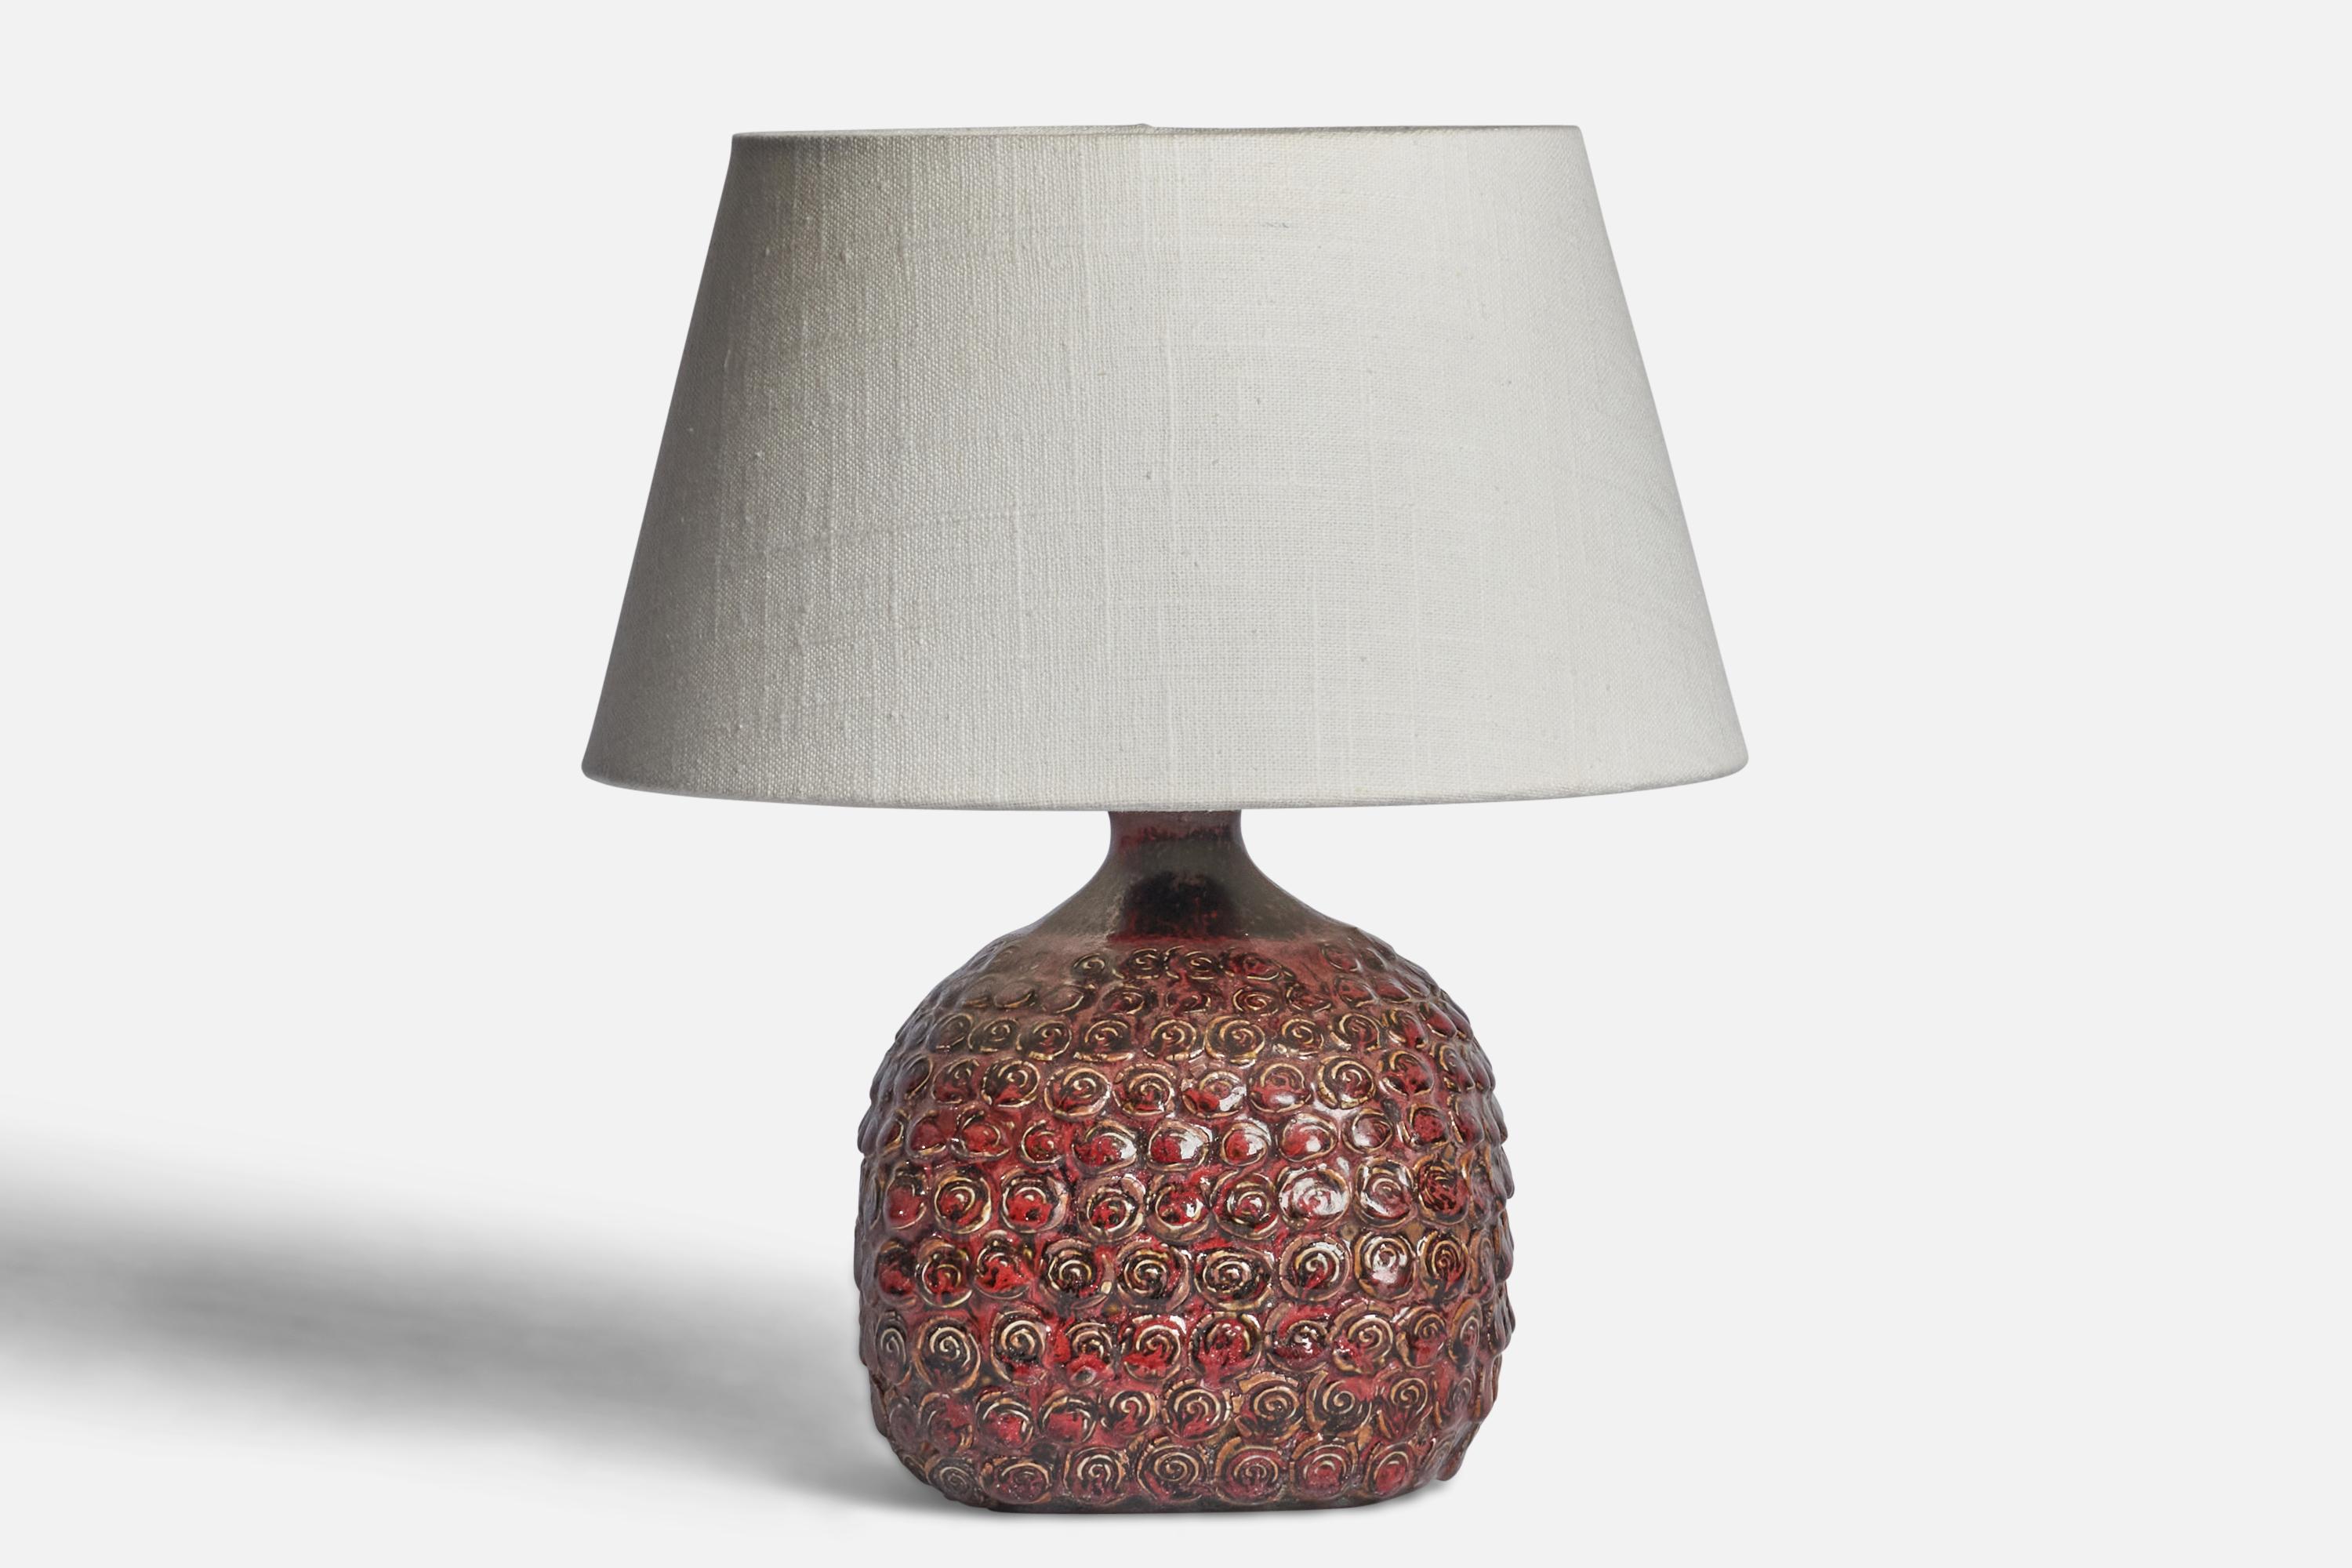 A red-glazed stoneware table lamp designed and produced in Denmark, c. 1960s.

Dimensions of Lamp (inches): 9